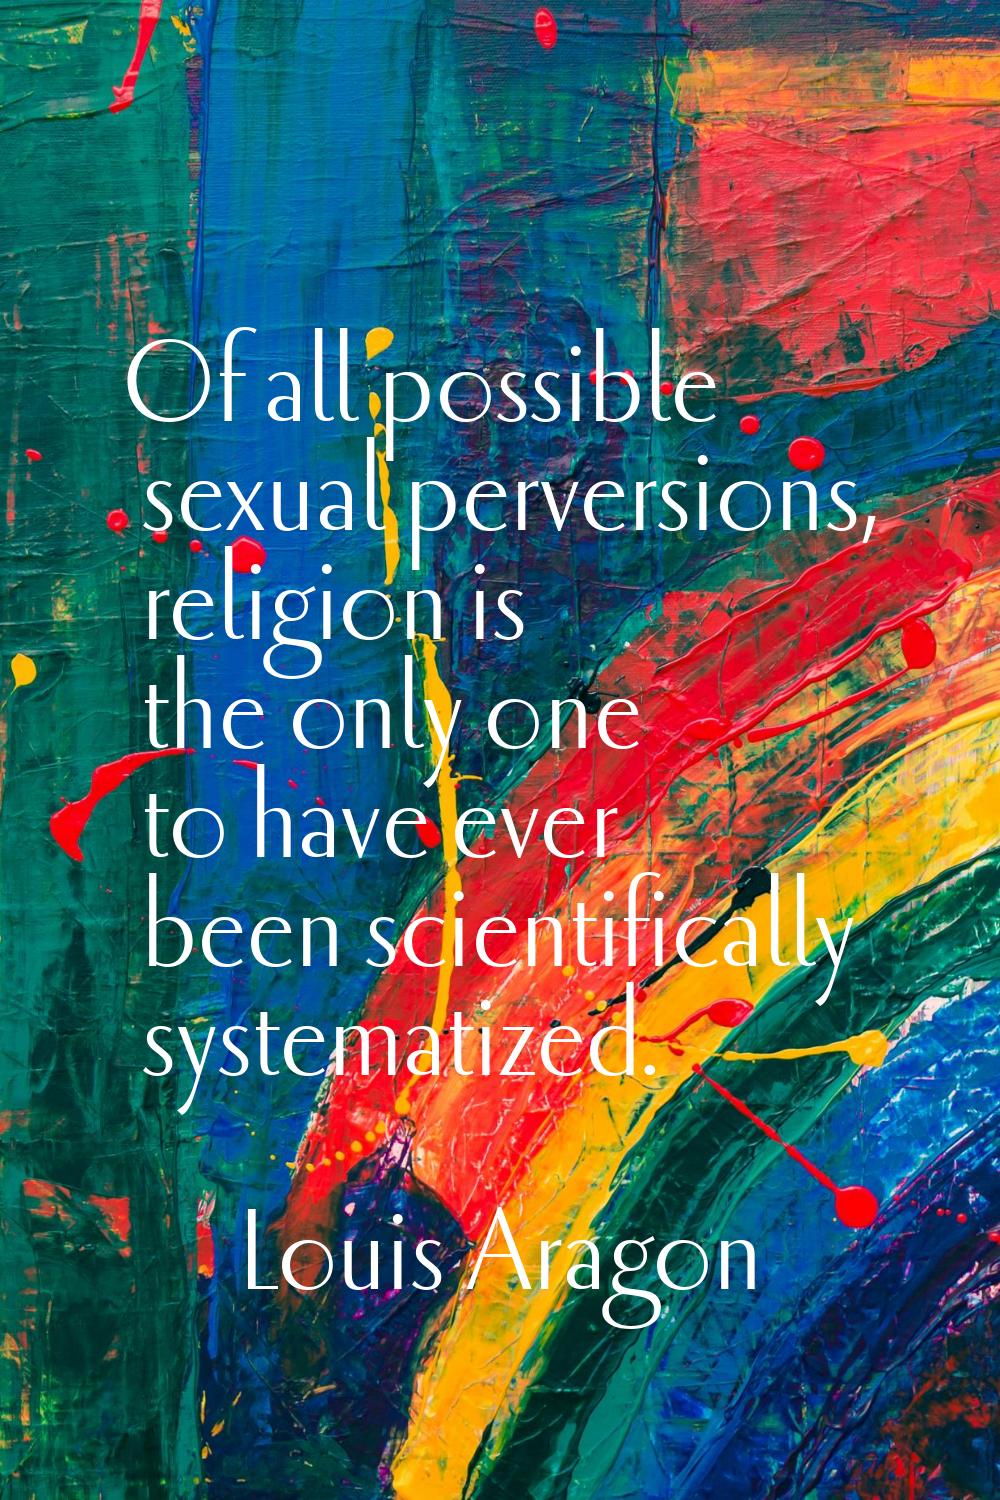 Of all possible sexual perversions, religion is the only one to have ever been scientifically syste